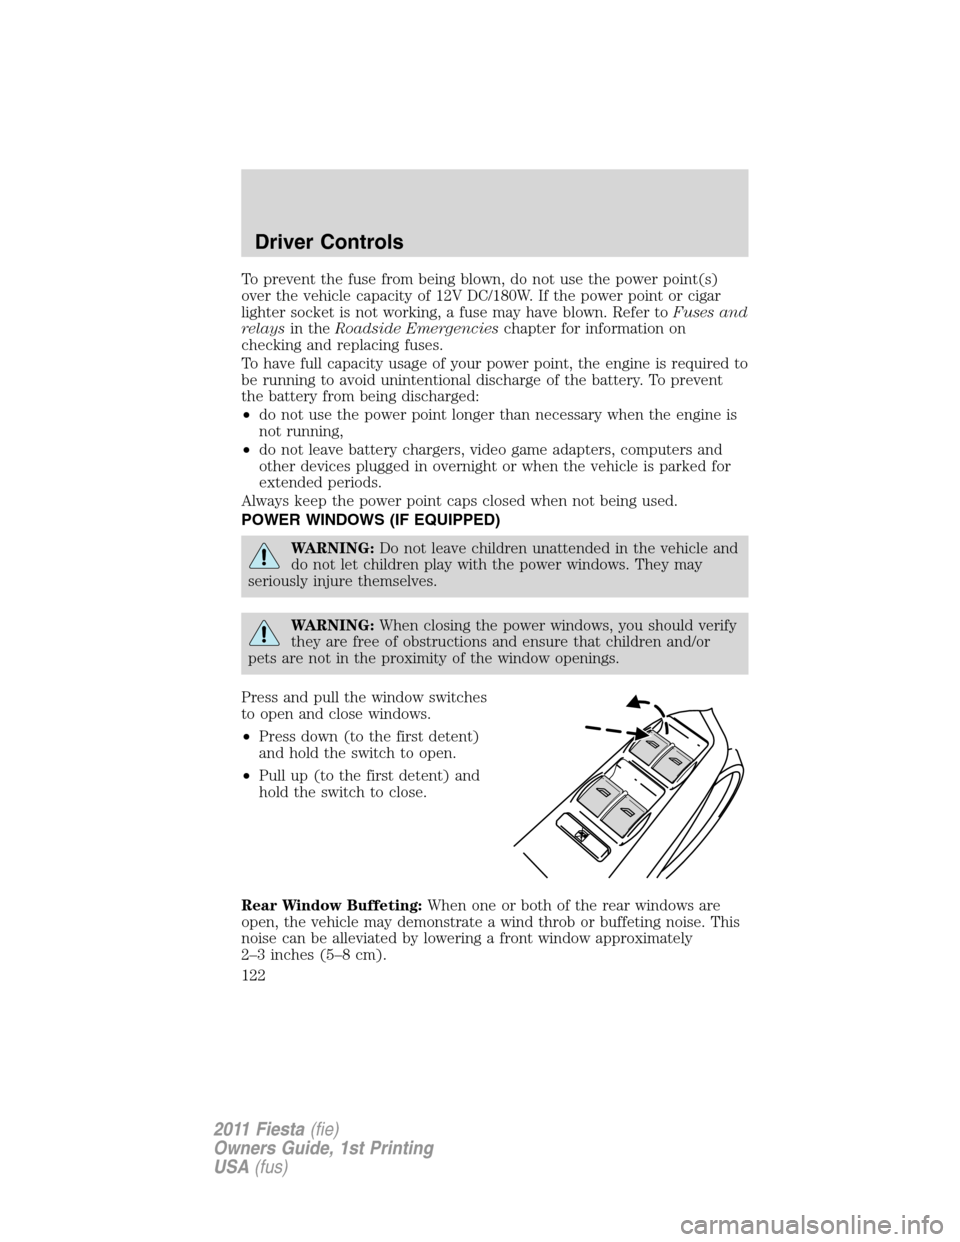 FORD FIESTA 2011 6.G Owners Manual To prevent the fuse from being blown, do not use the power point(s)
over the vehicle capacity of 12V DC/180W. If the power point or cigar
lighter socket is not working, a fuse may have blown. Refer to